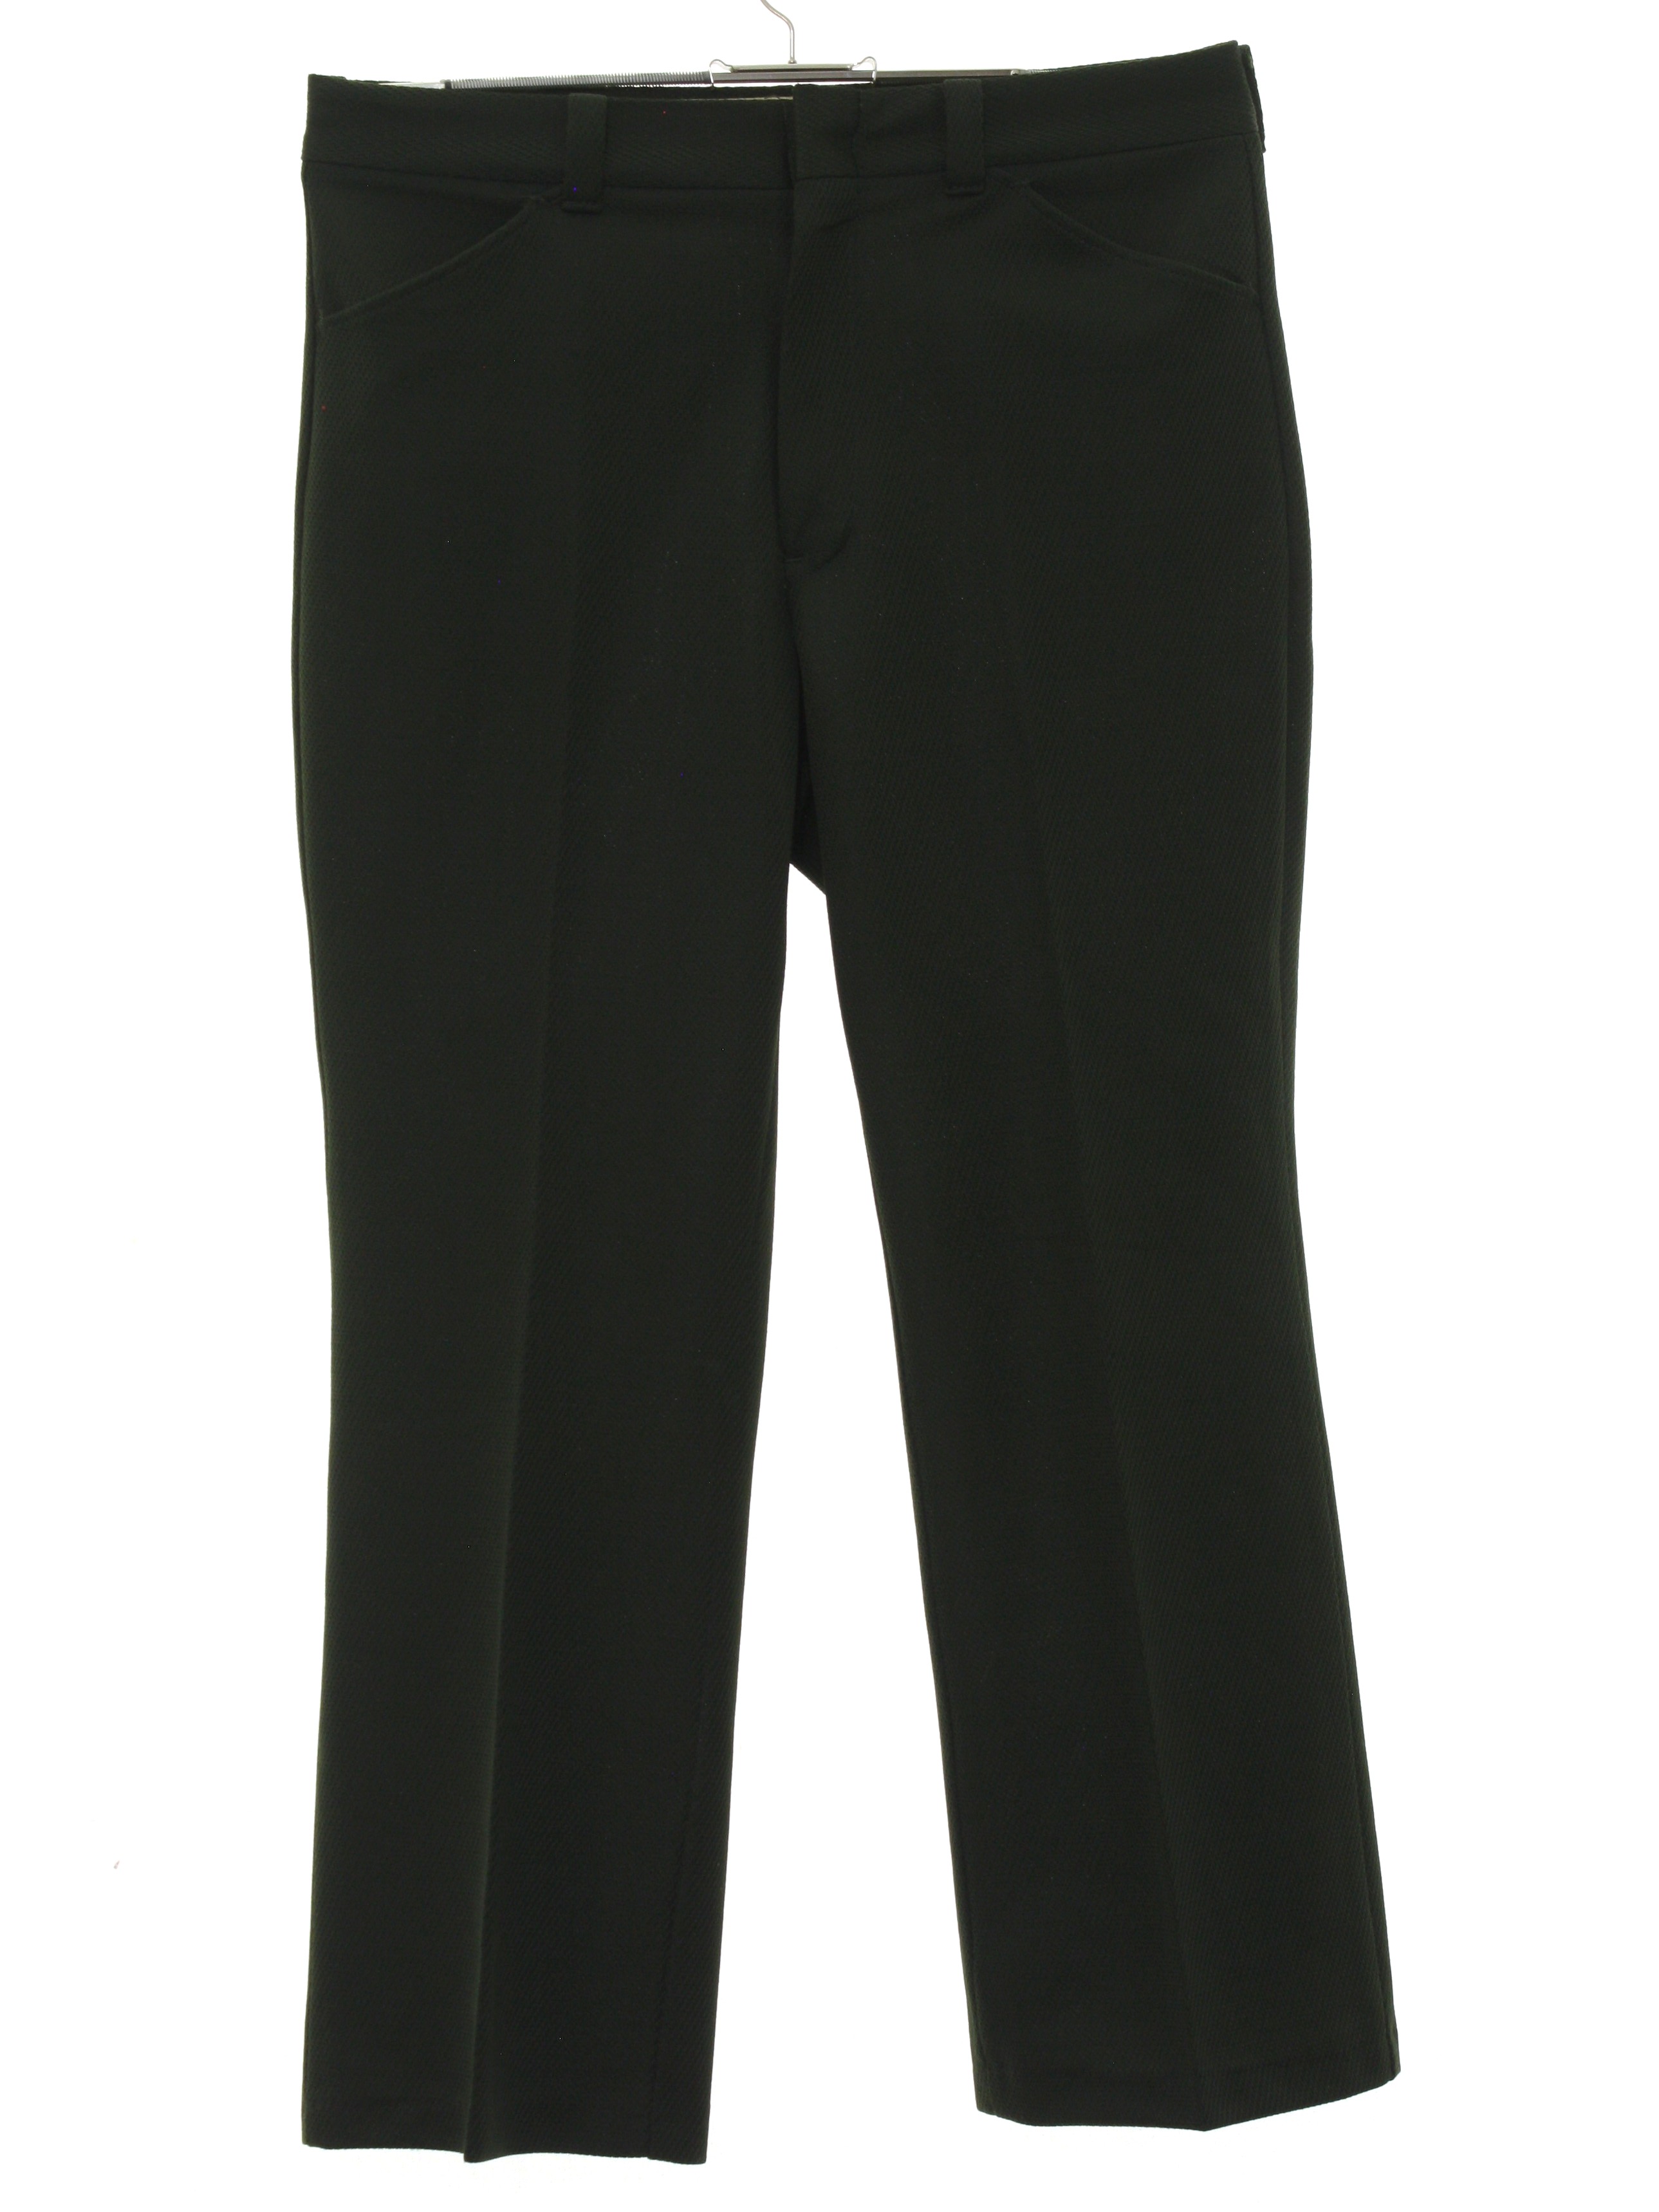 1970's Flared Pants / Flares (Easy Care): 70s -Easy Care- Mens dark ...